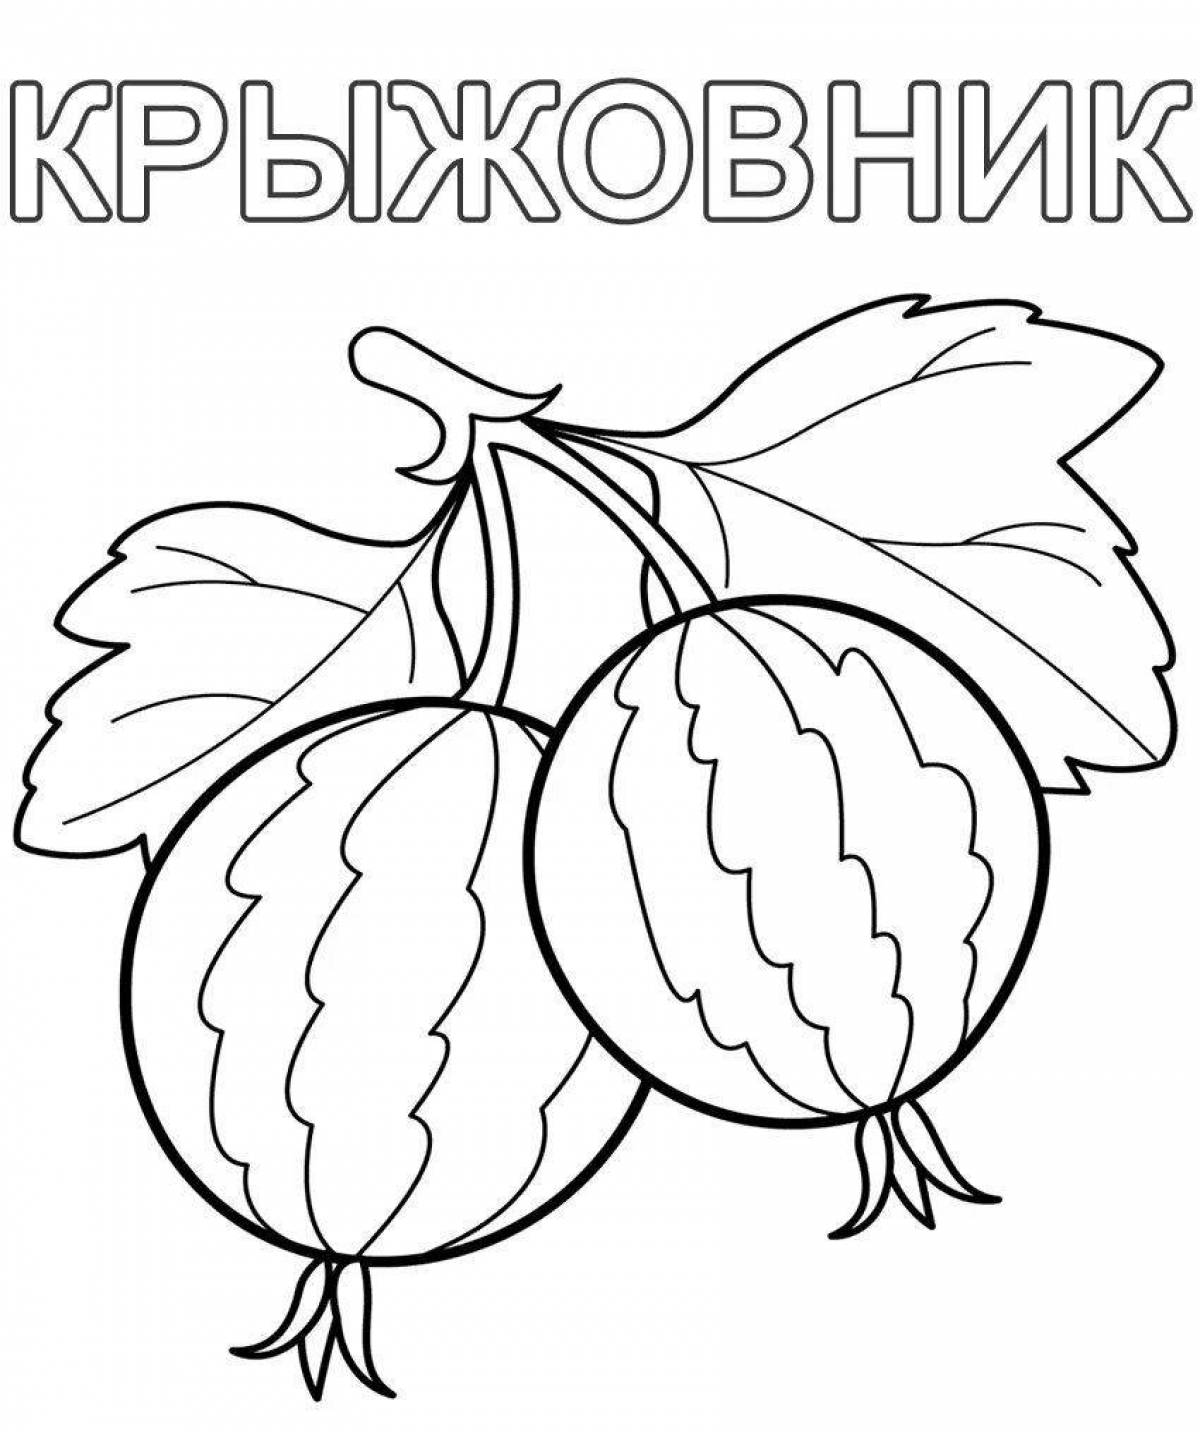 Playful berry coloring page for kids